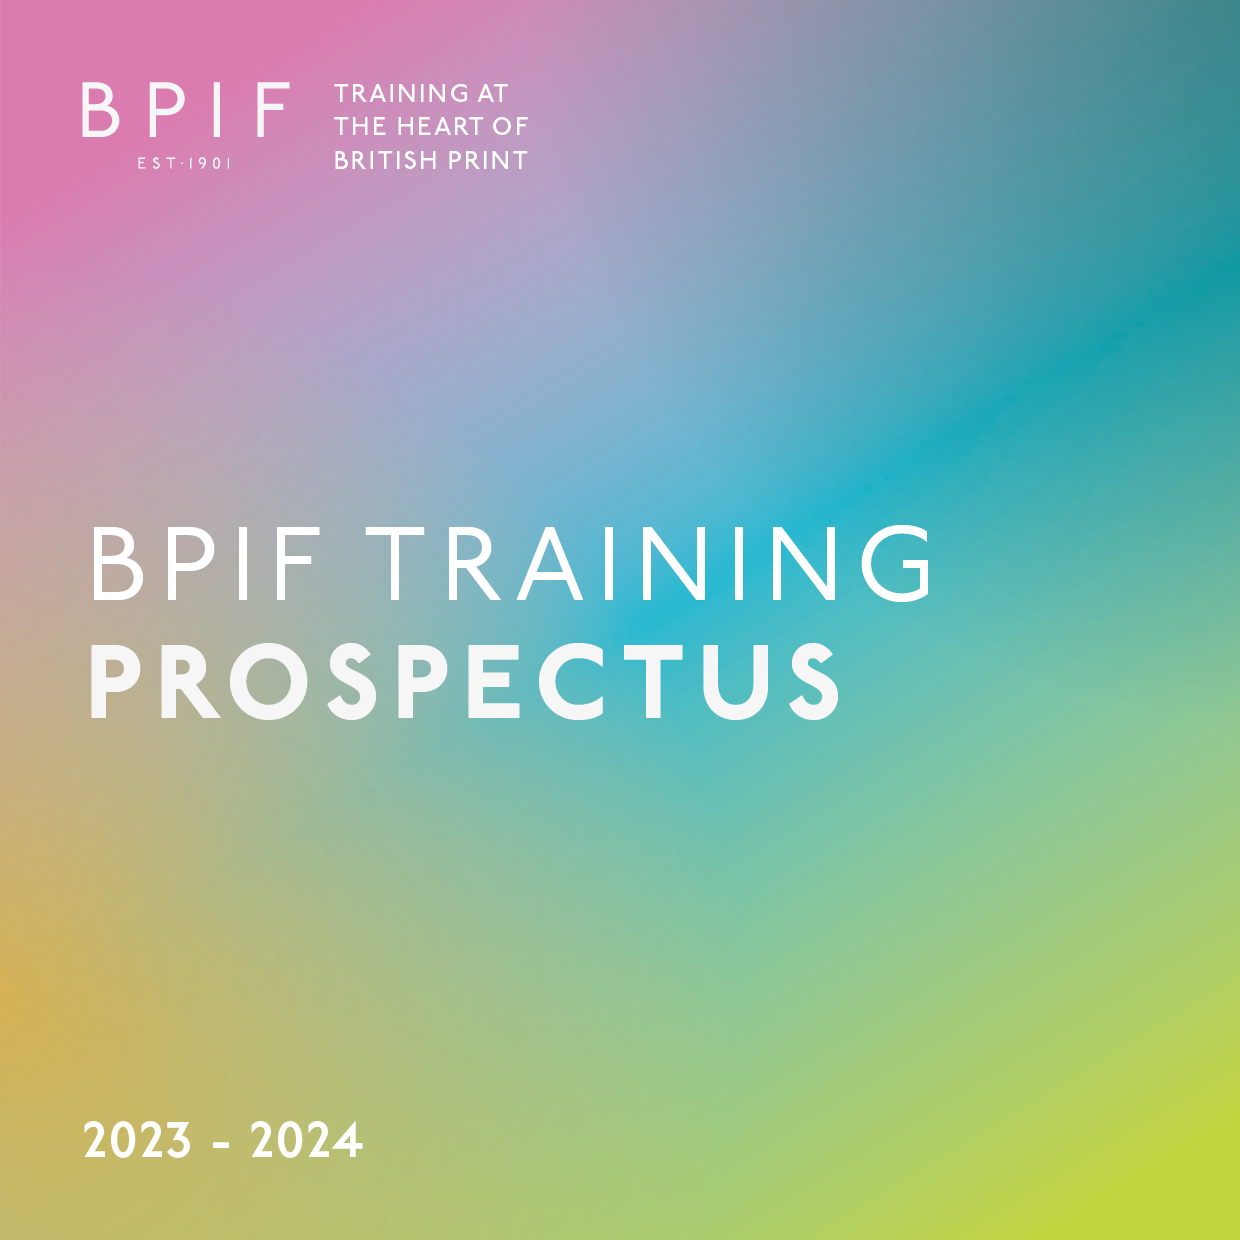 BPIF TRAINING ANNOUNCES NEW TRAINING PROSPECTUS FOR PRINT AND GRAPHICS COMMUNICATIONS INDUSTRY